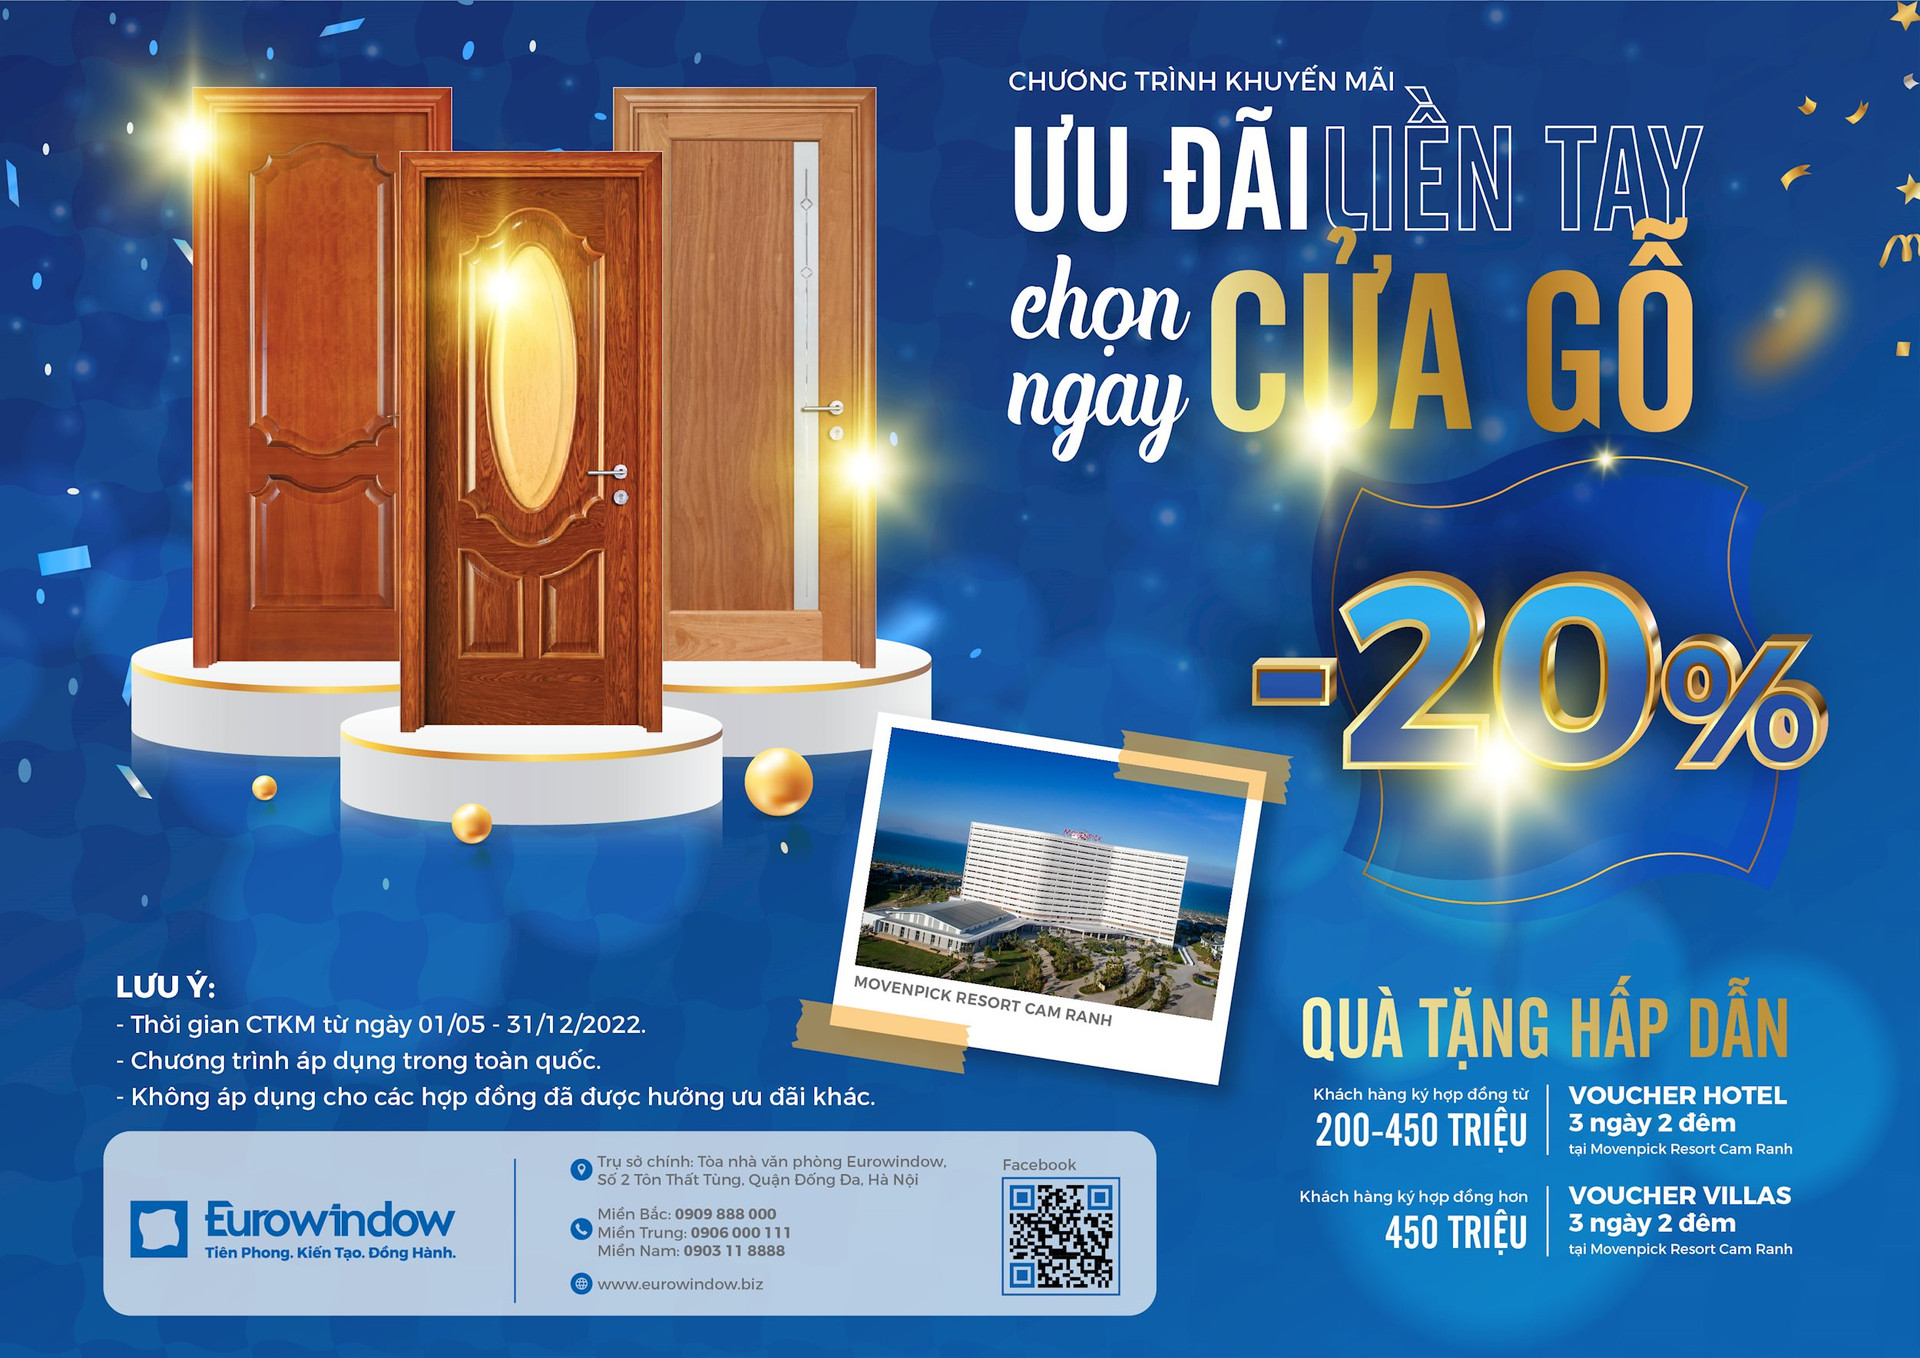 anh-1-poster-ctkm-cua-go-02.jpg